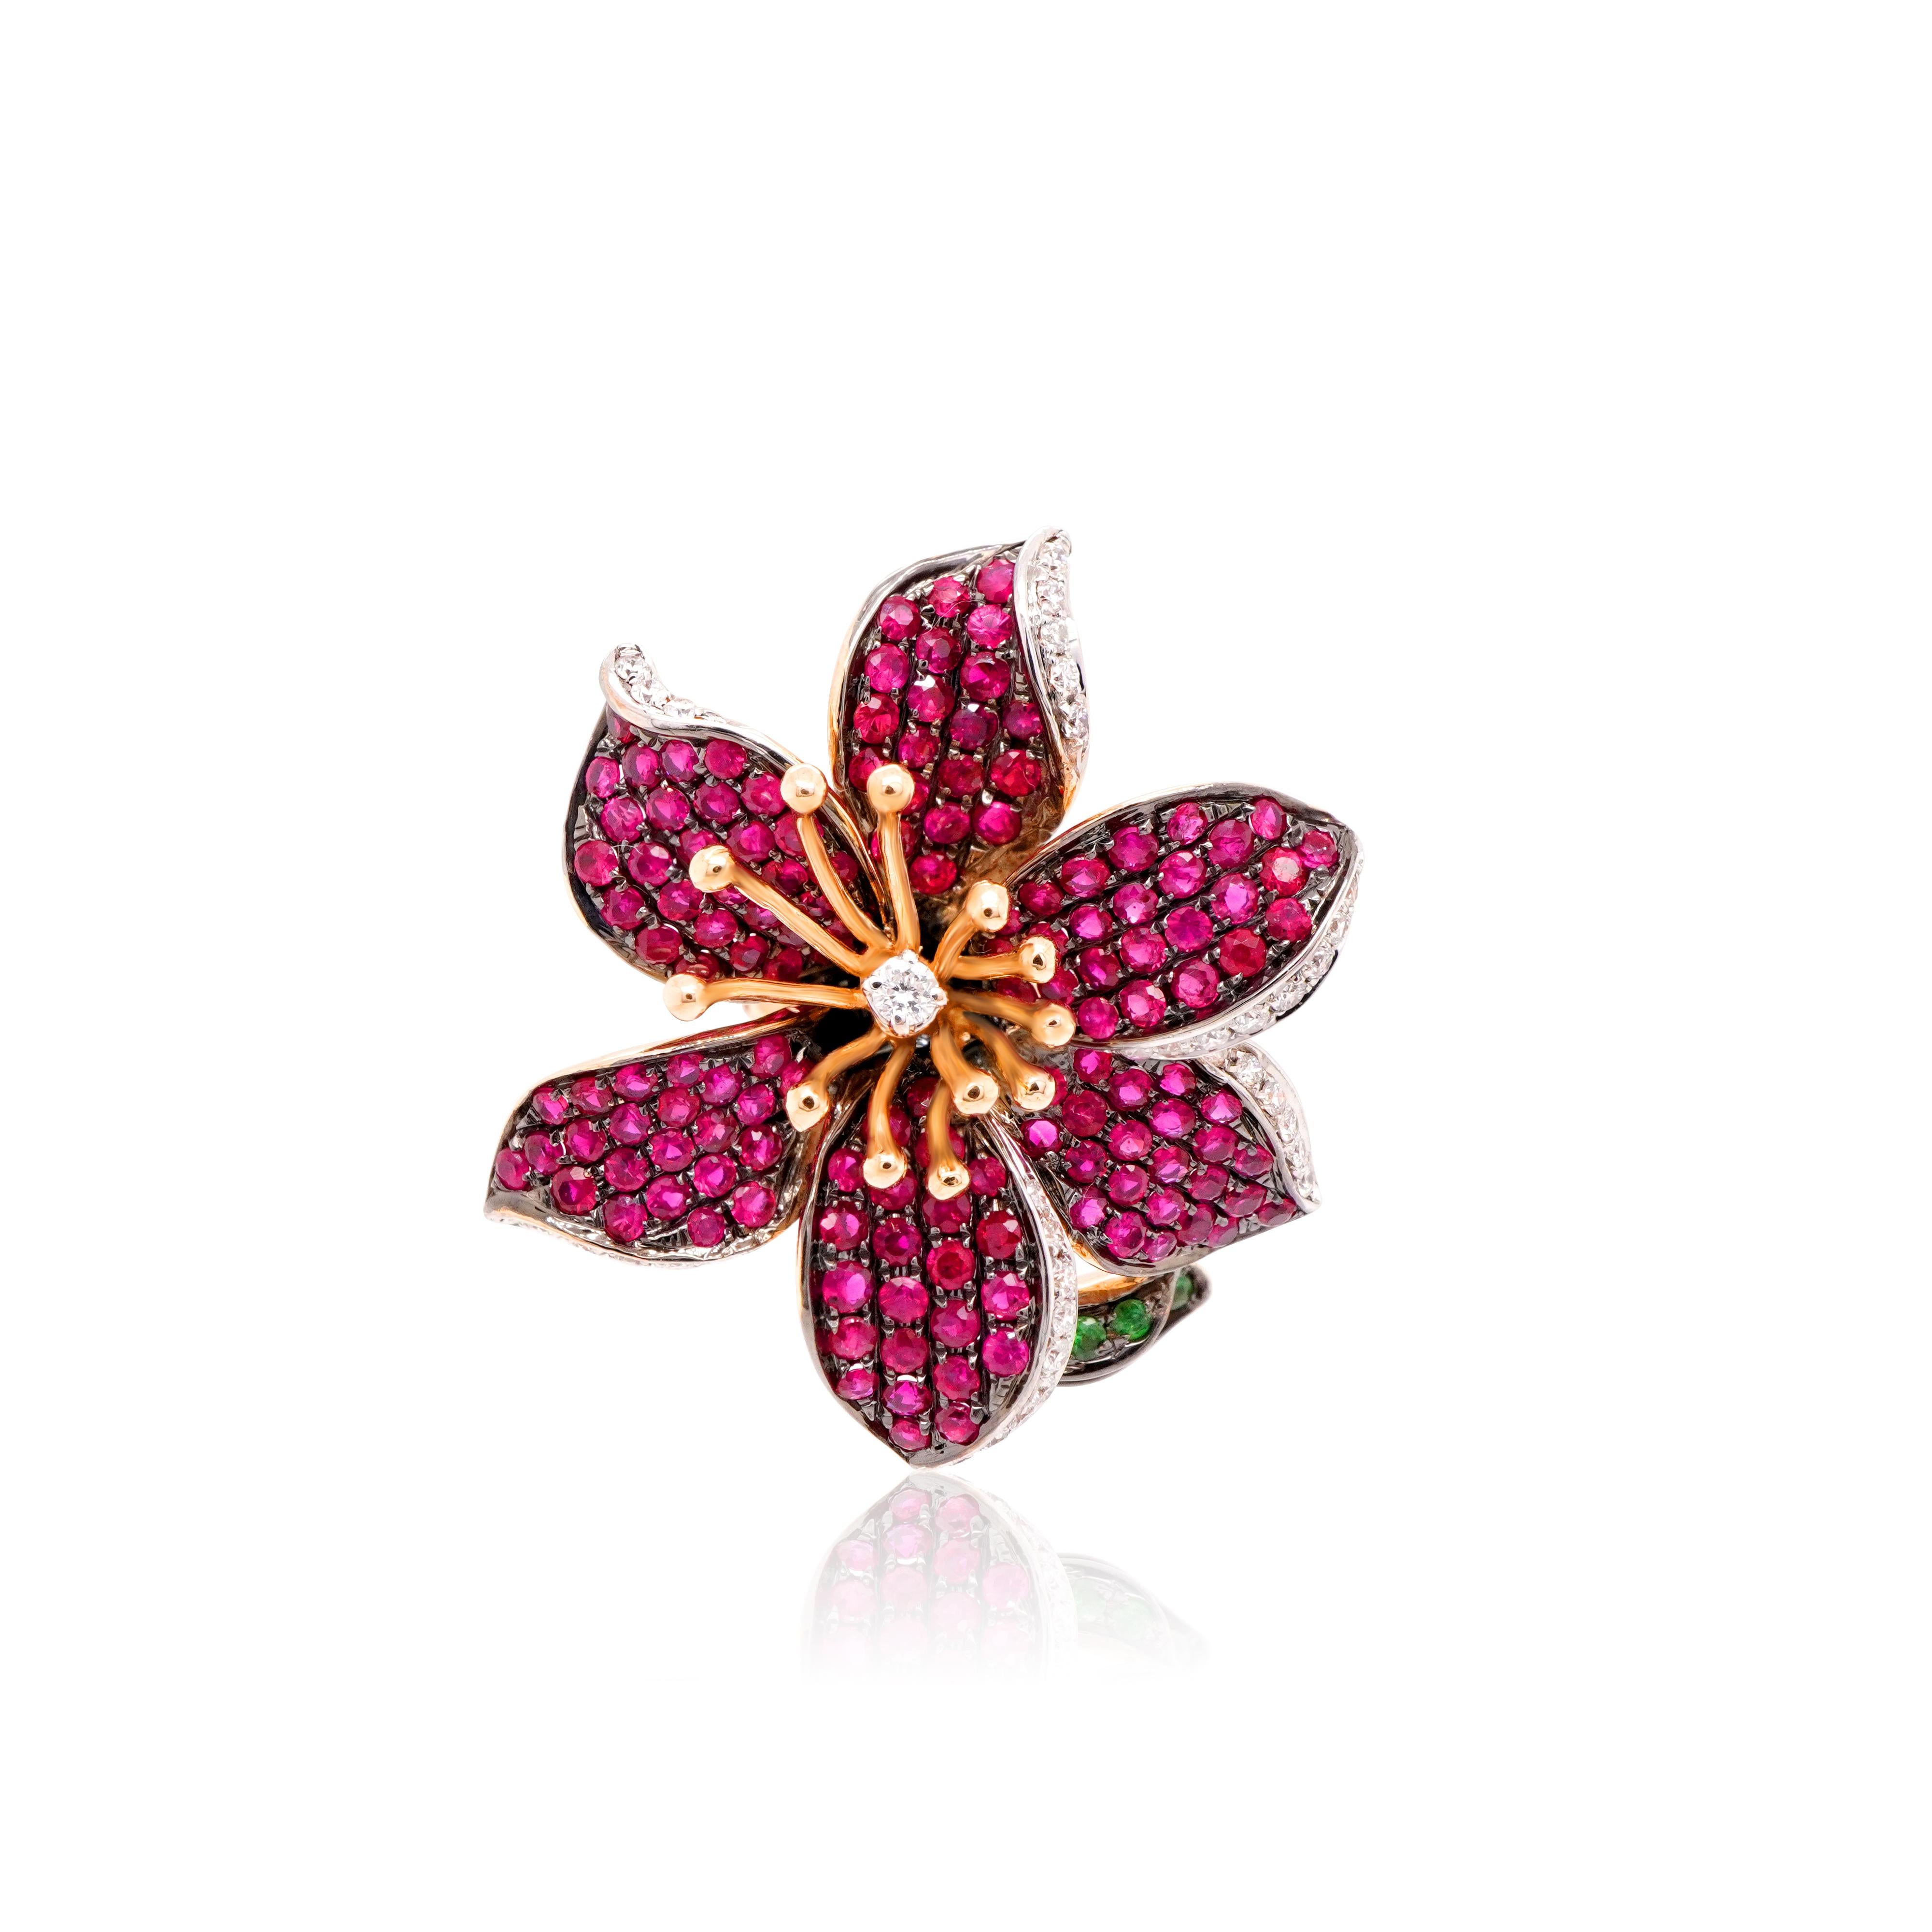 18K GOLD with Rubies and Diamonds and Green Garnet 
GARDEN FLOWER PARADISE COLLECTION 

74 ROUDN DIAMONDS 0.52 CT
16 ROUND GREEN GARDEN T 0.18 CT
287 ROUND RUBIES 4.17 CT 
18KR 17.06 GM

Don't miss a chance to embrace yourself with an amazing